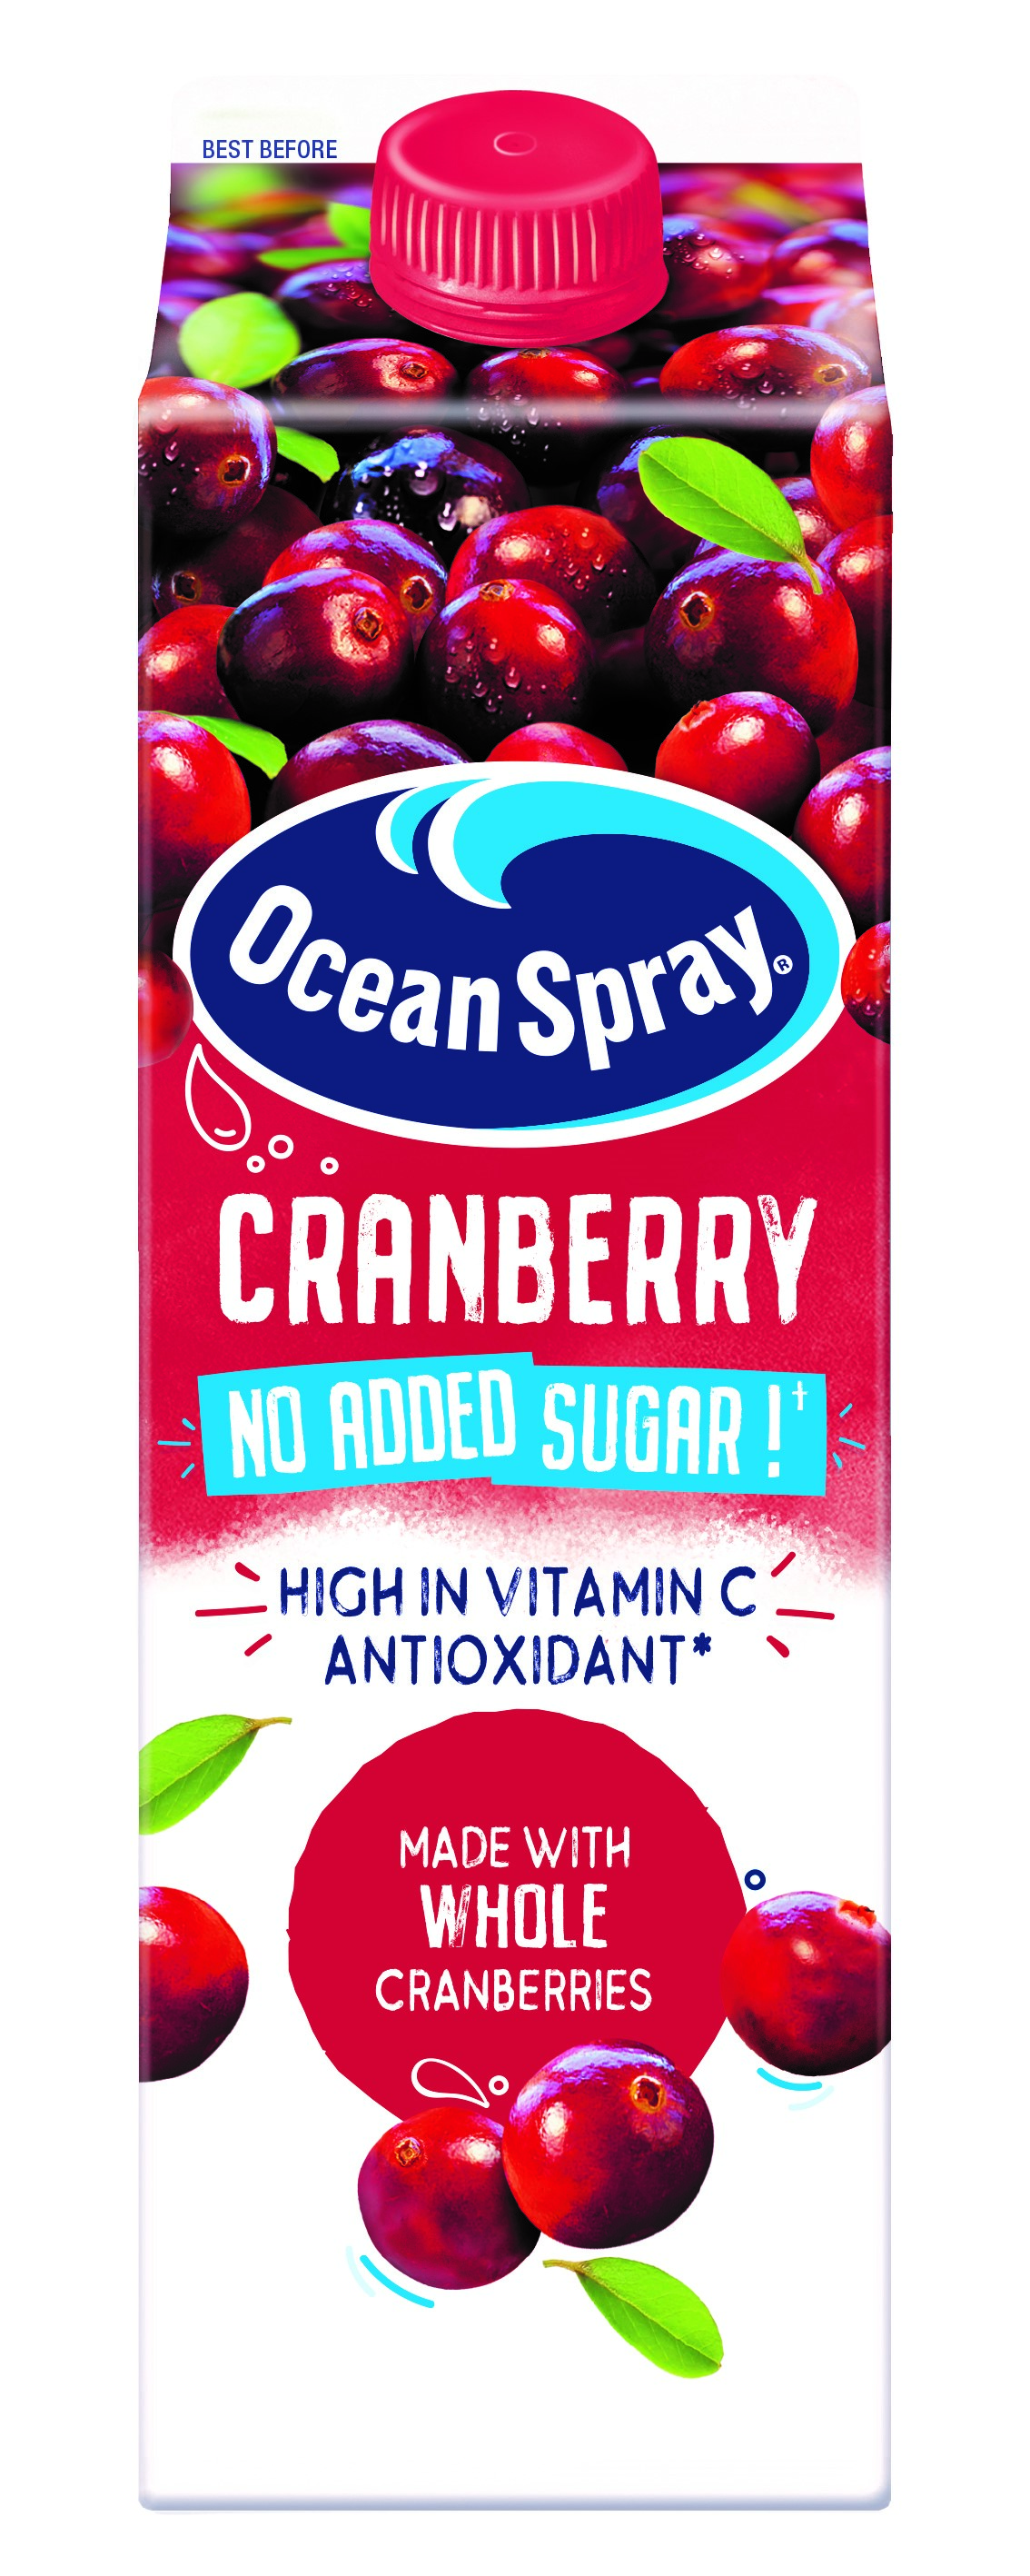 Ocean Spray cranberry juice is currently £1.30 with a Tesco Clubcard